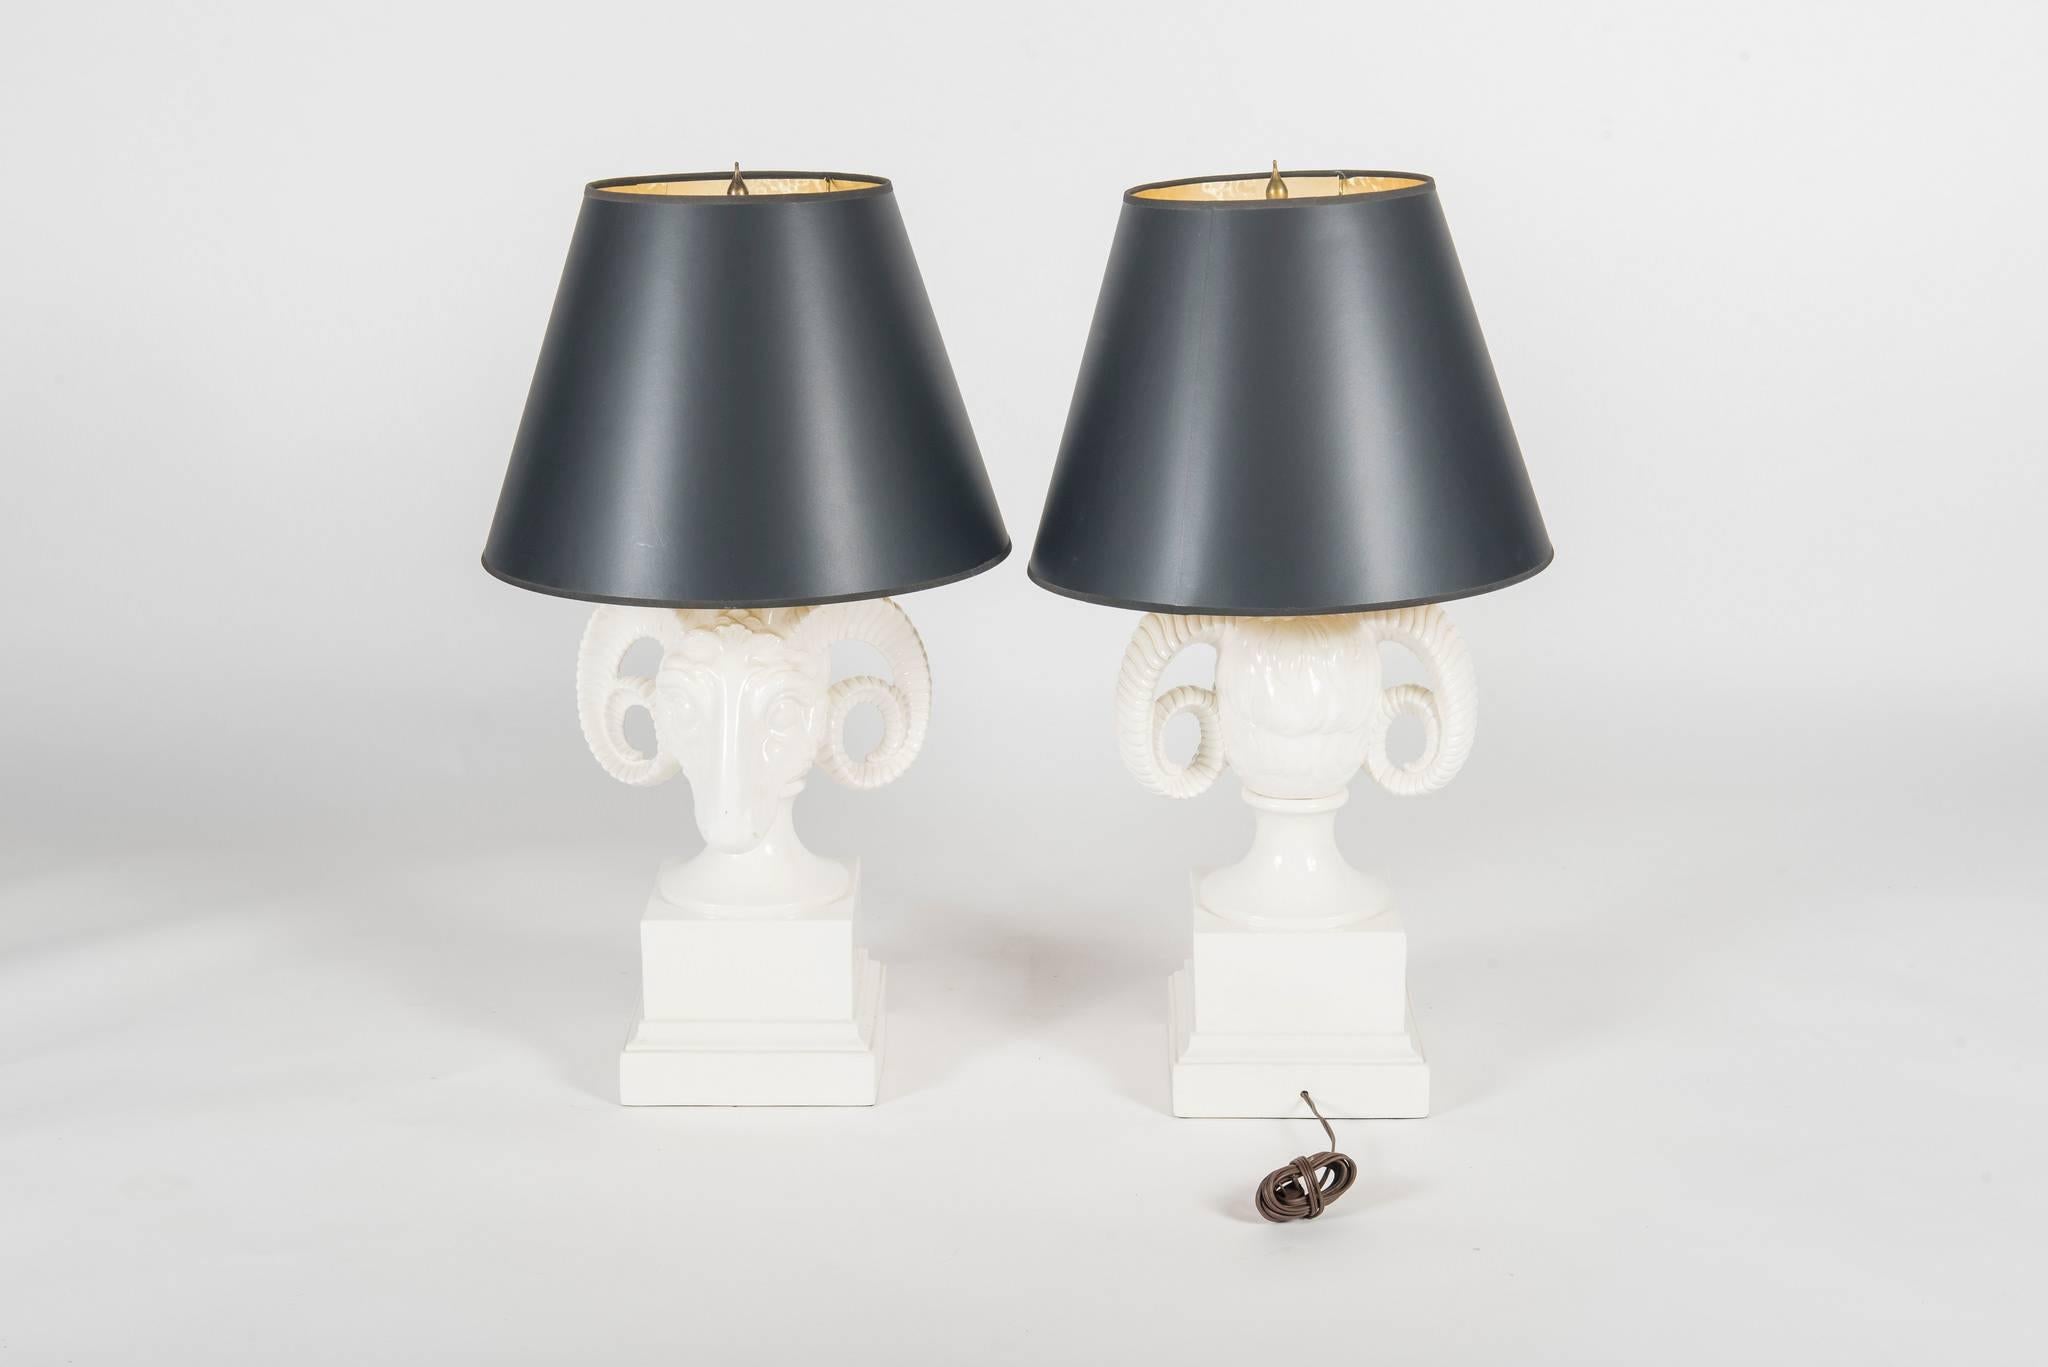 A Classic vintage pair of Hollywood Regency white ram's head lamps with black Empire shades. These lamps have been newly electrified to UL standards.

Lamps can be sold without shades with a $200.00 deduction.